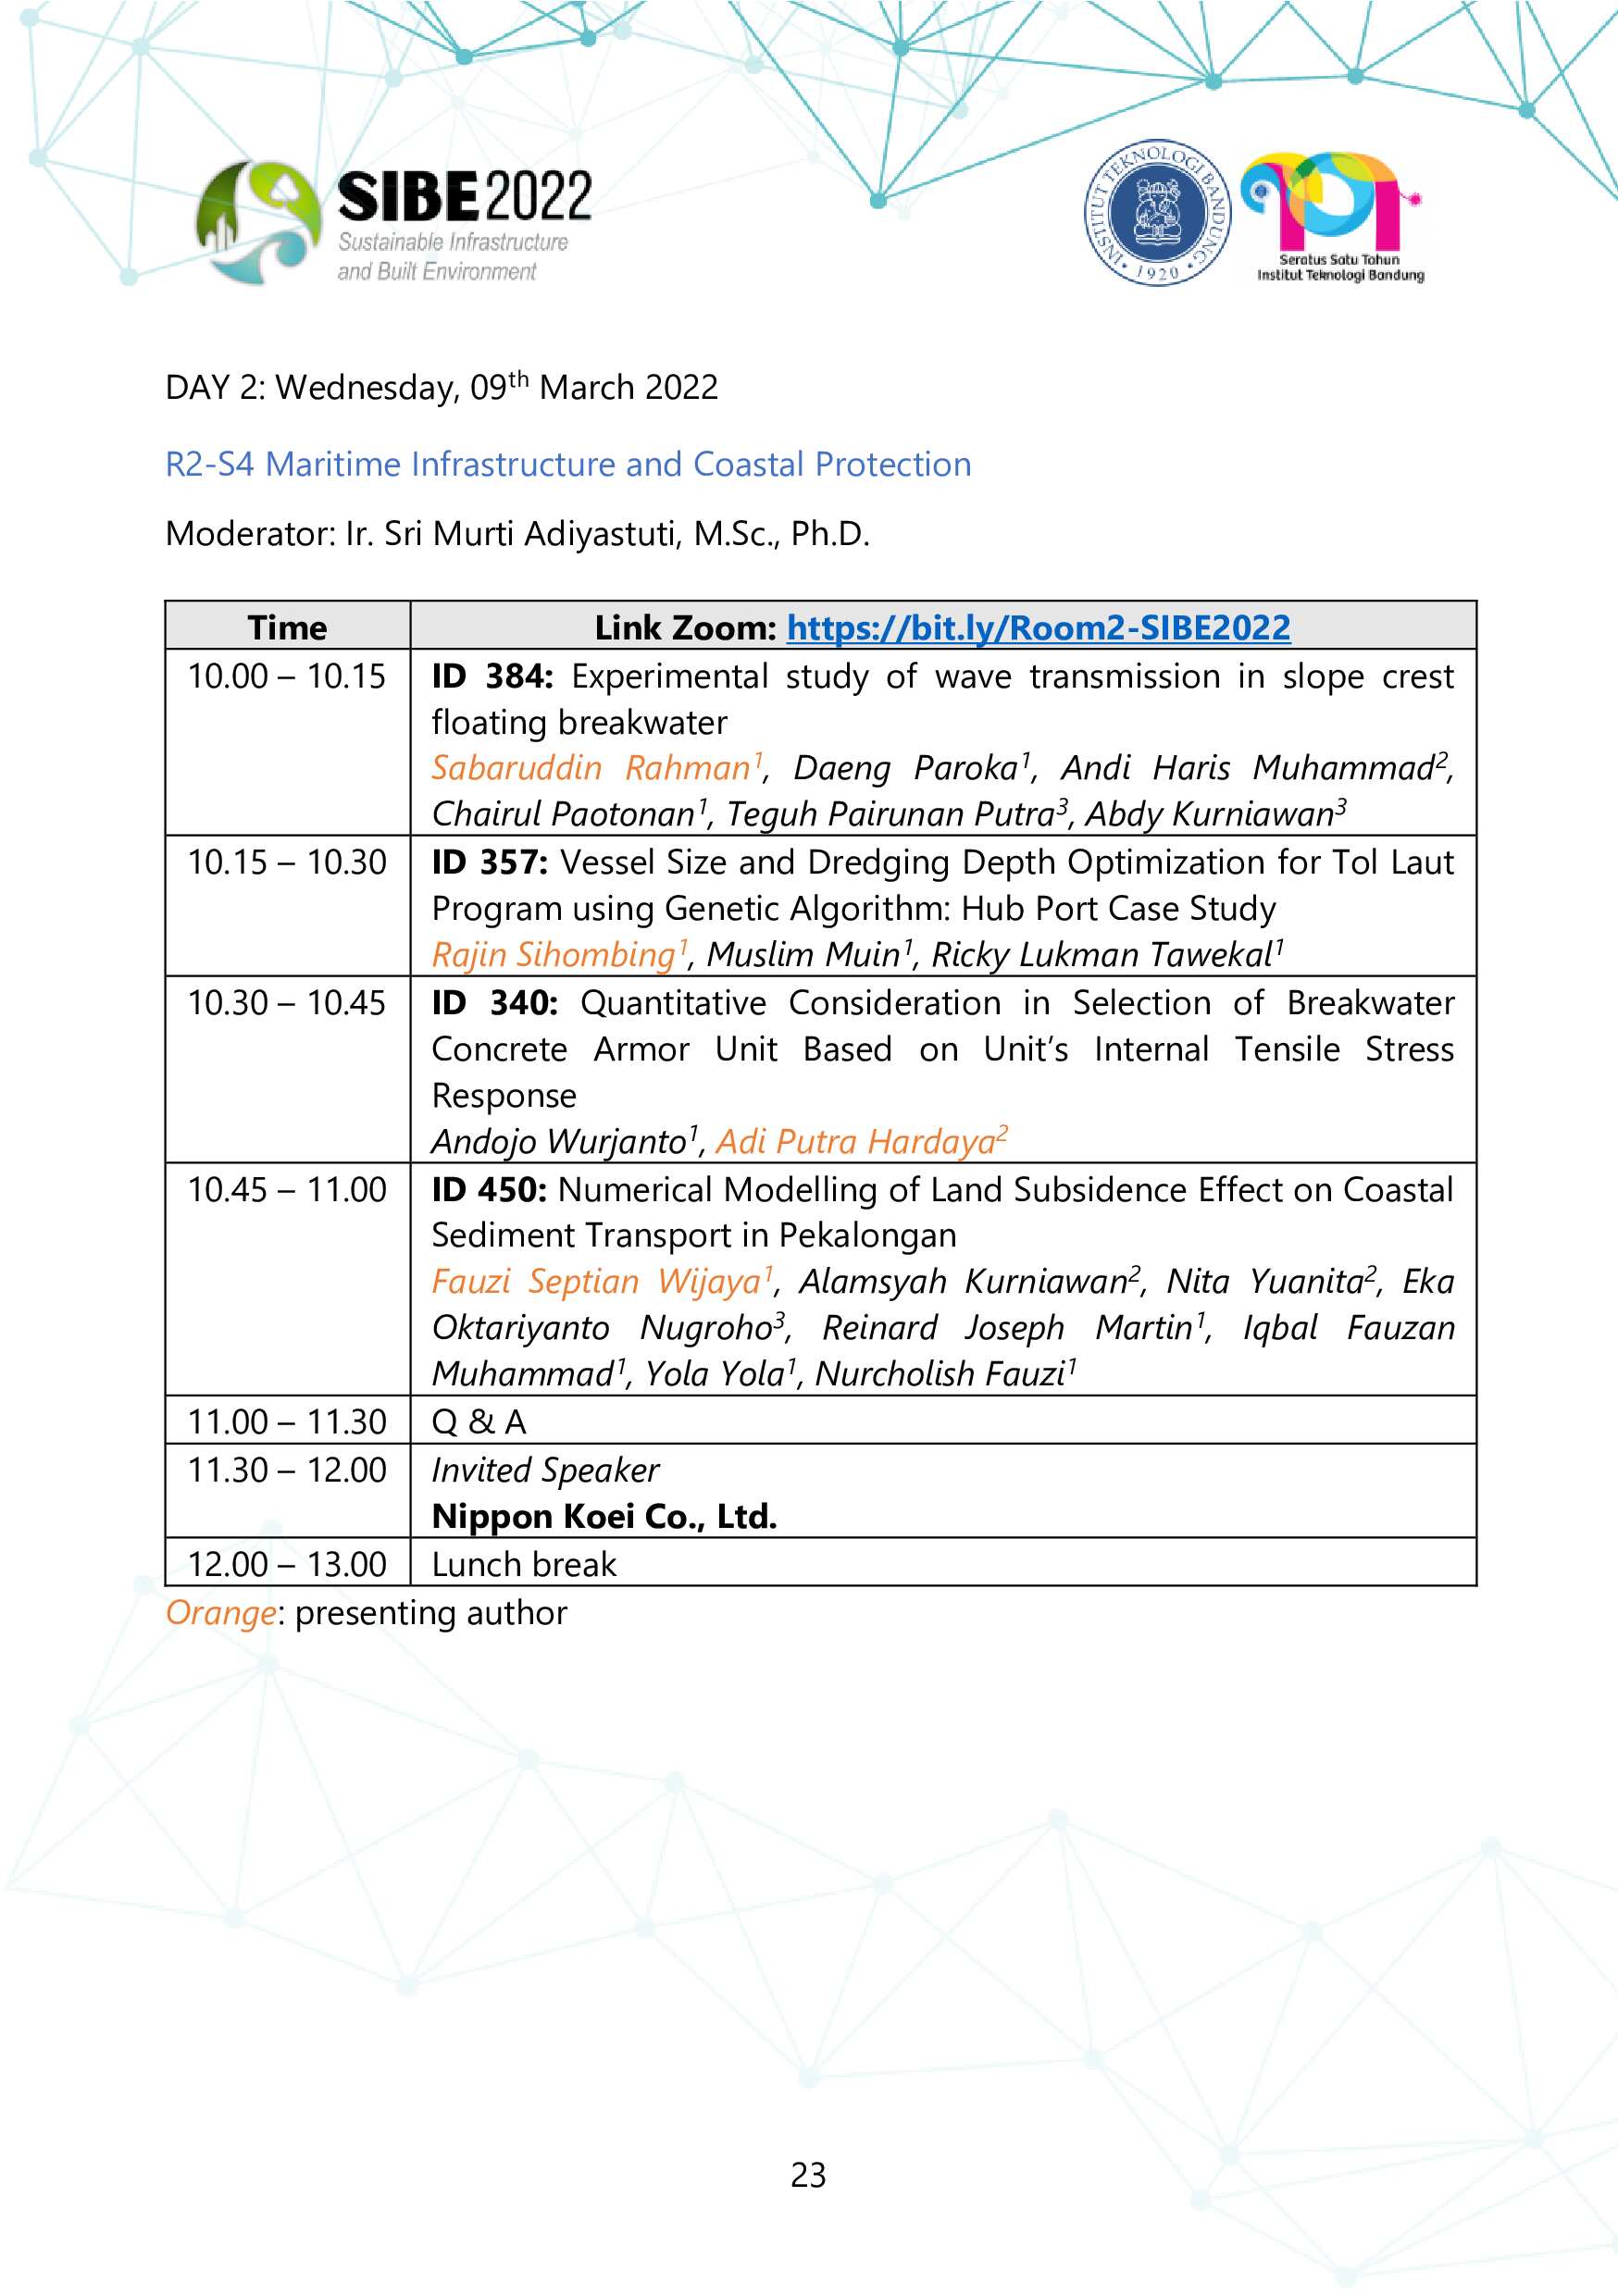 SIBE 2022 Program Schedule 8-9 March 2022-22